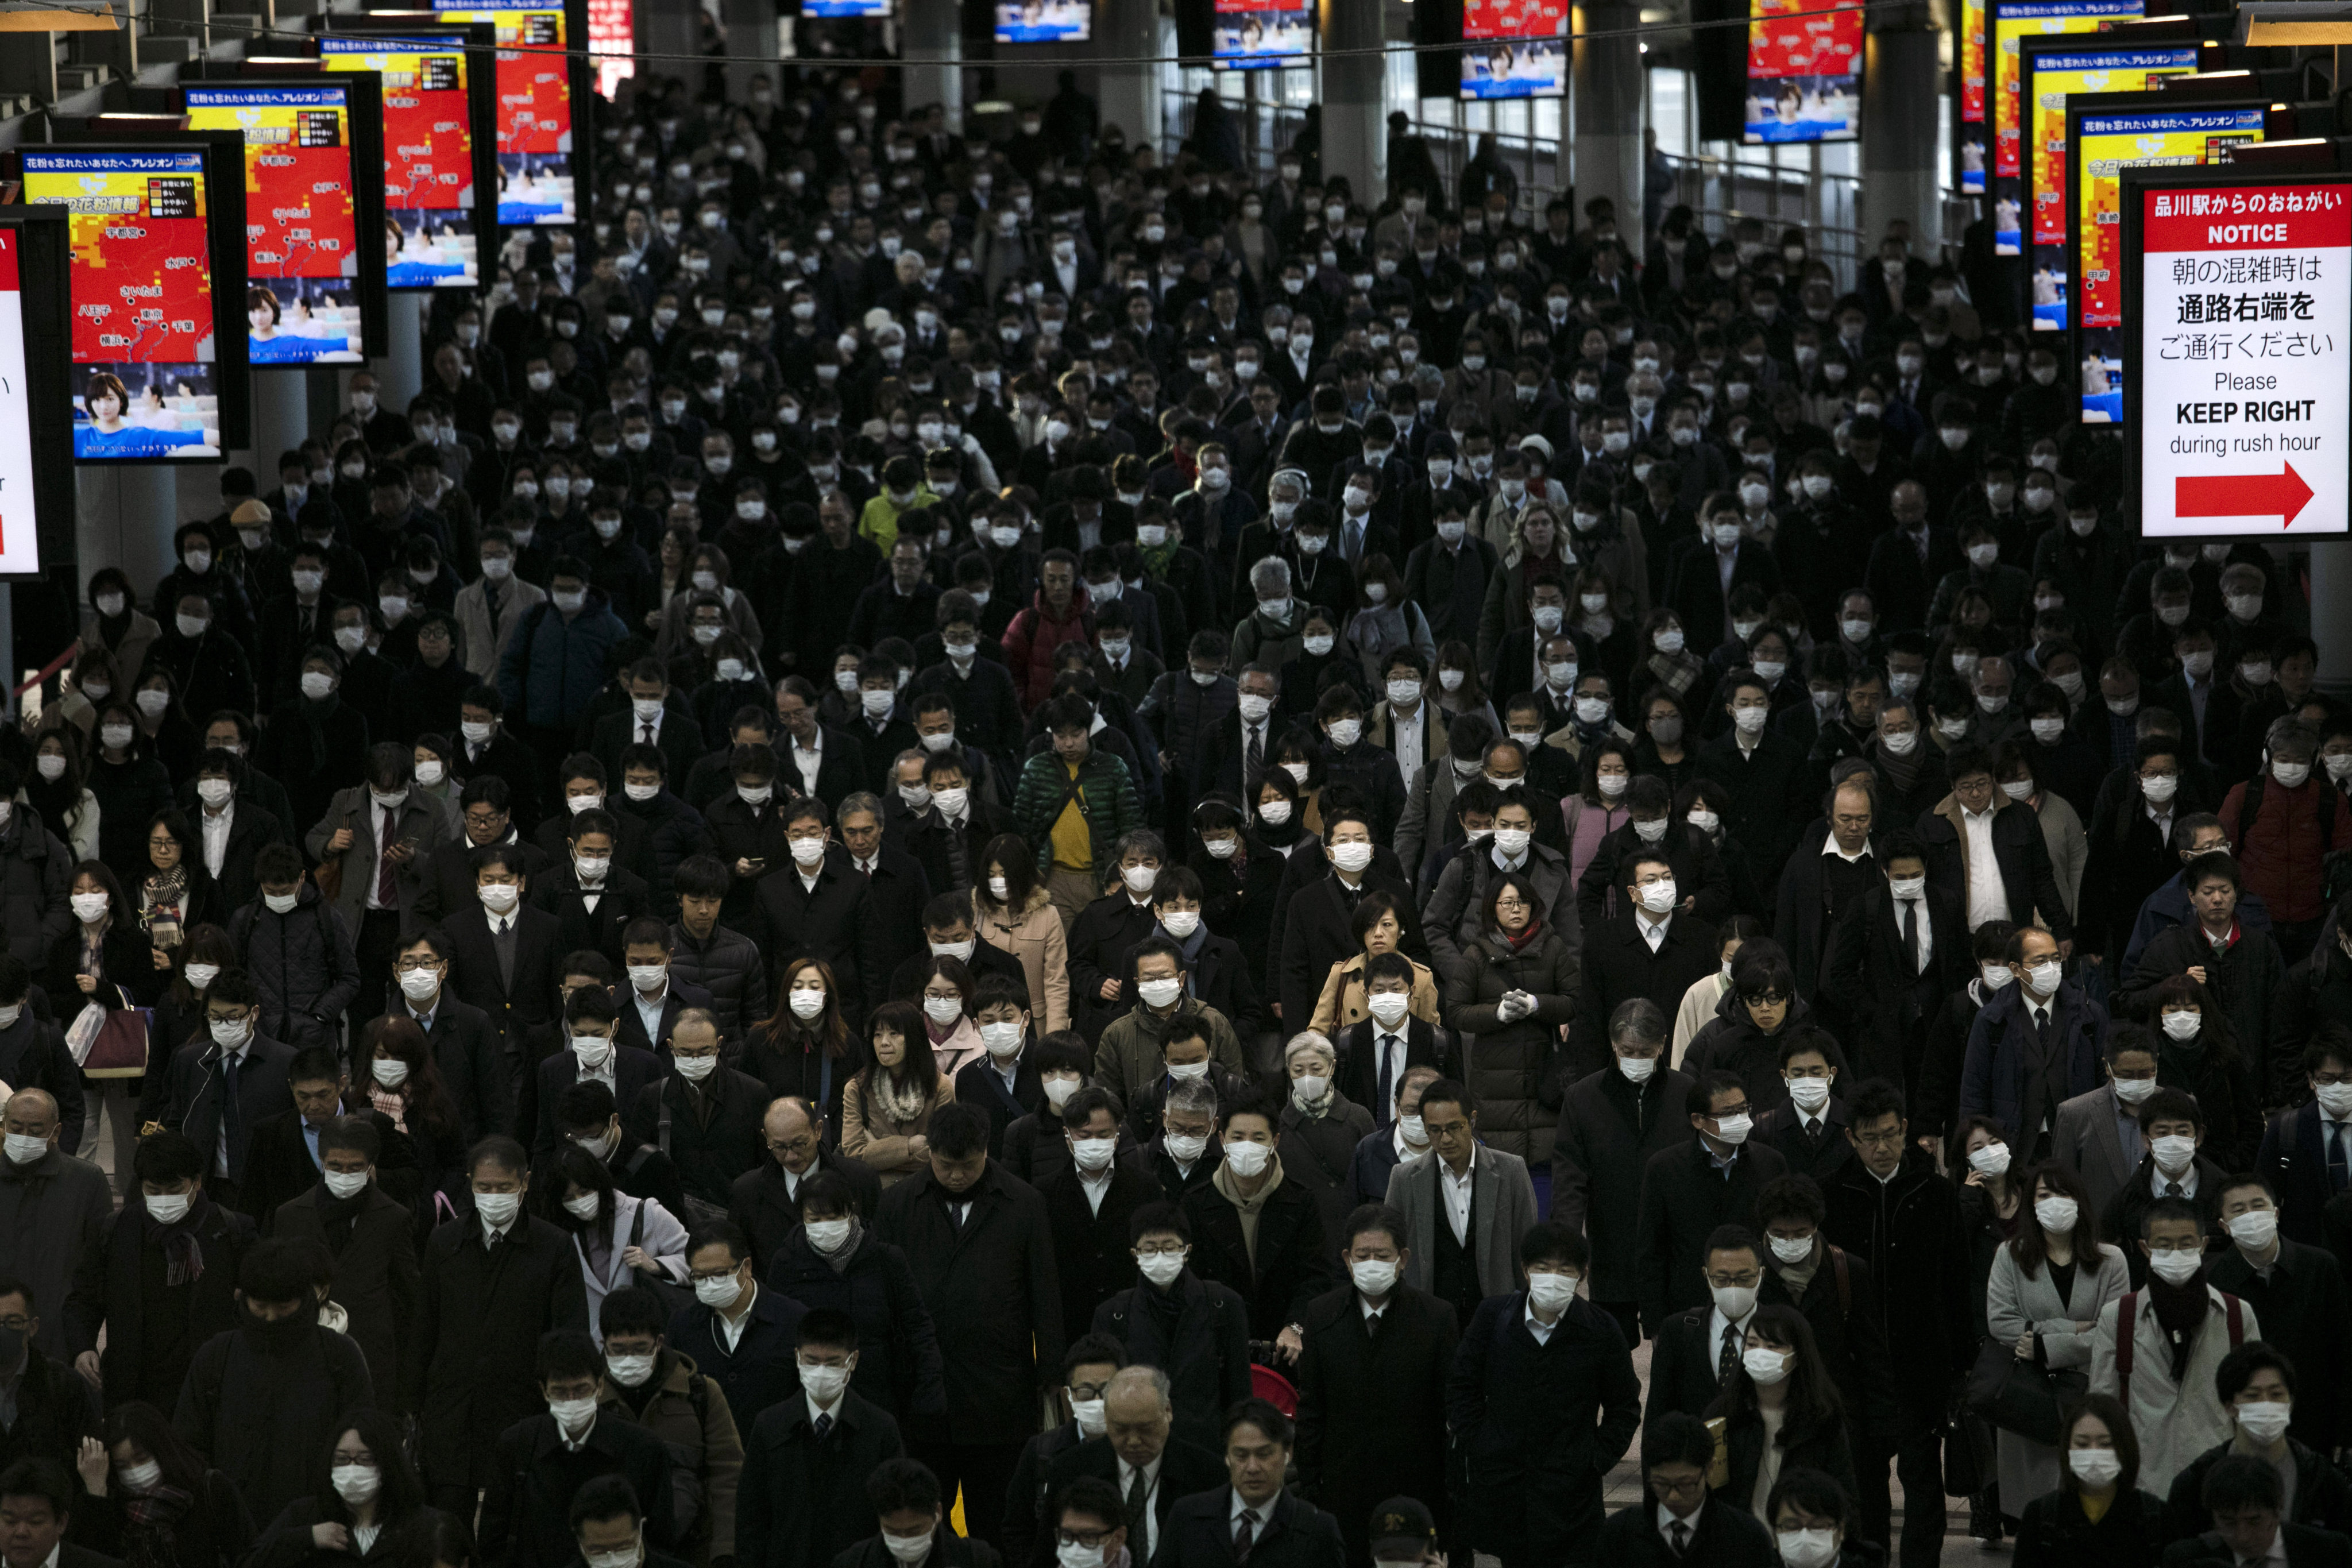 Commuters walk through Shinagawa Station in Tokyo. Many Japanese worry about being seen as troublemakers, are reluctant to question authority and may be afraid to speak up. Photo: AP